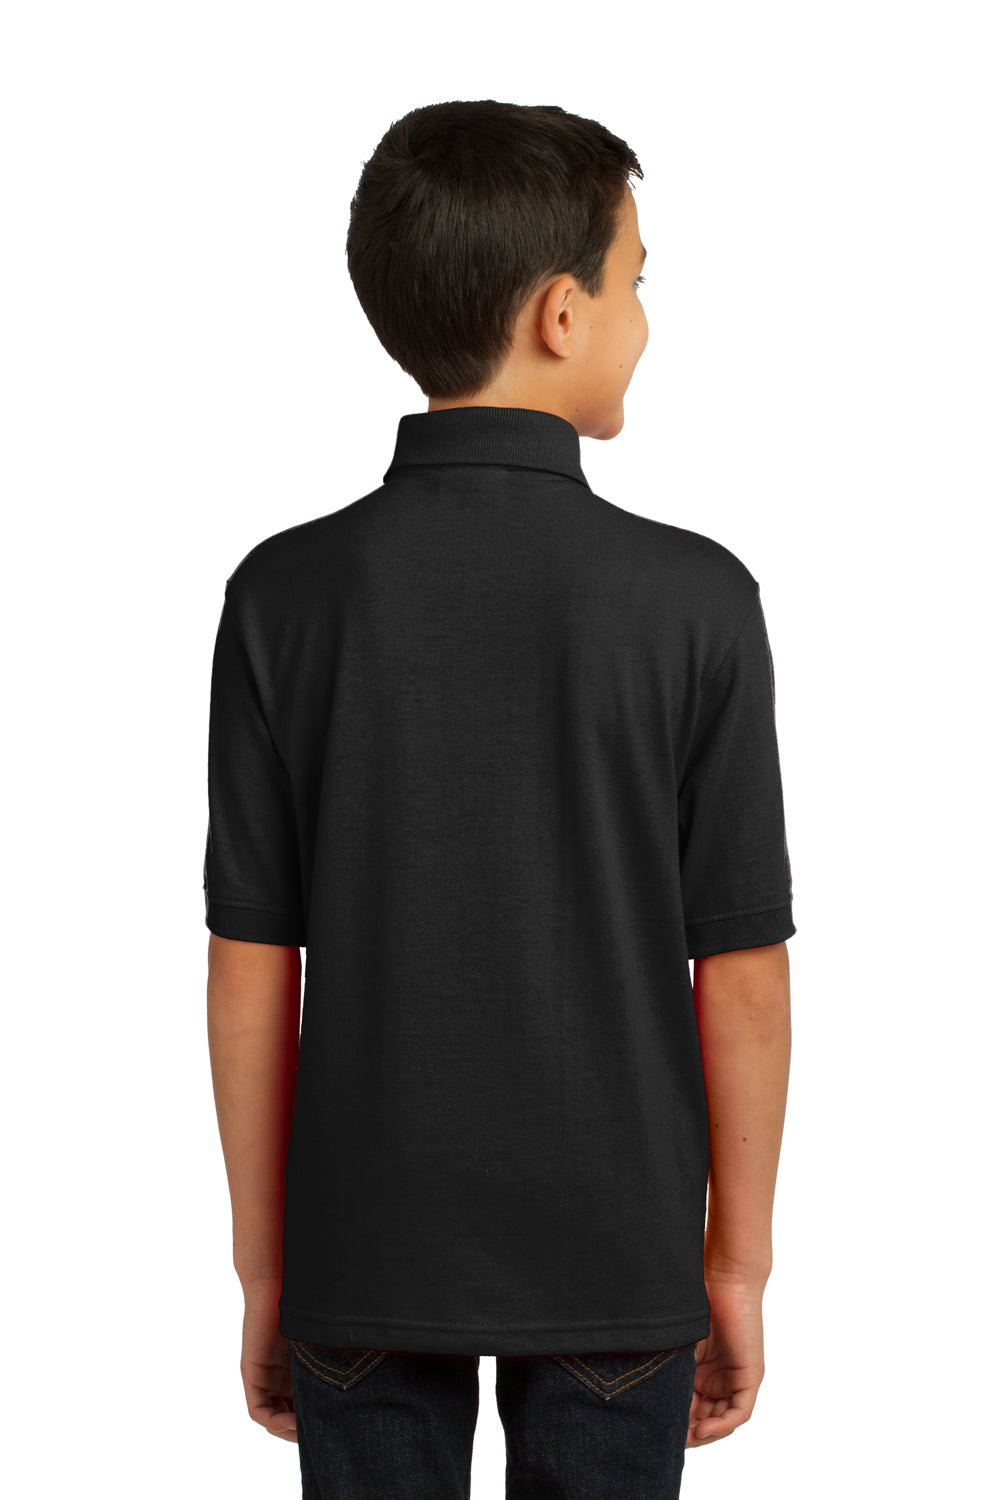 Port & Company KP55Y Youth Core Stain Resistant Short Sleeve Polo Shirt Black Back